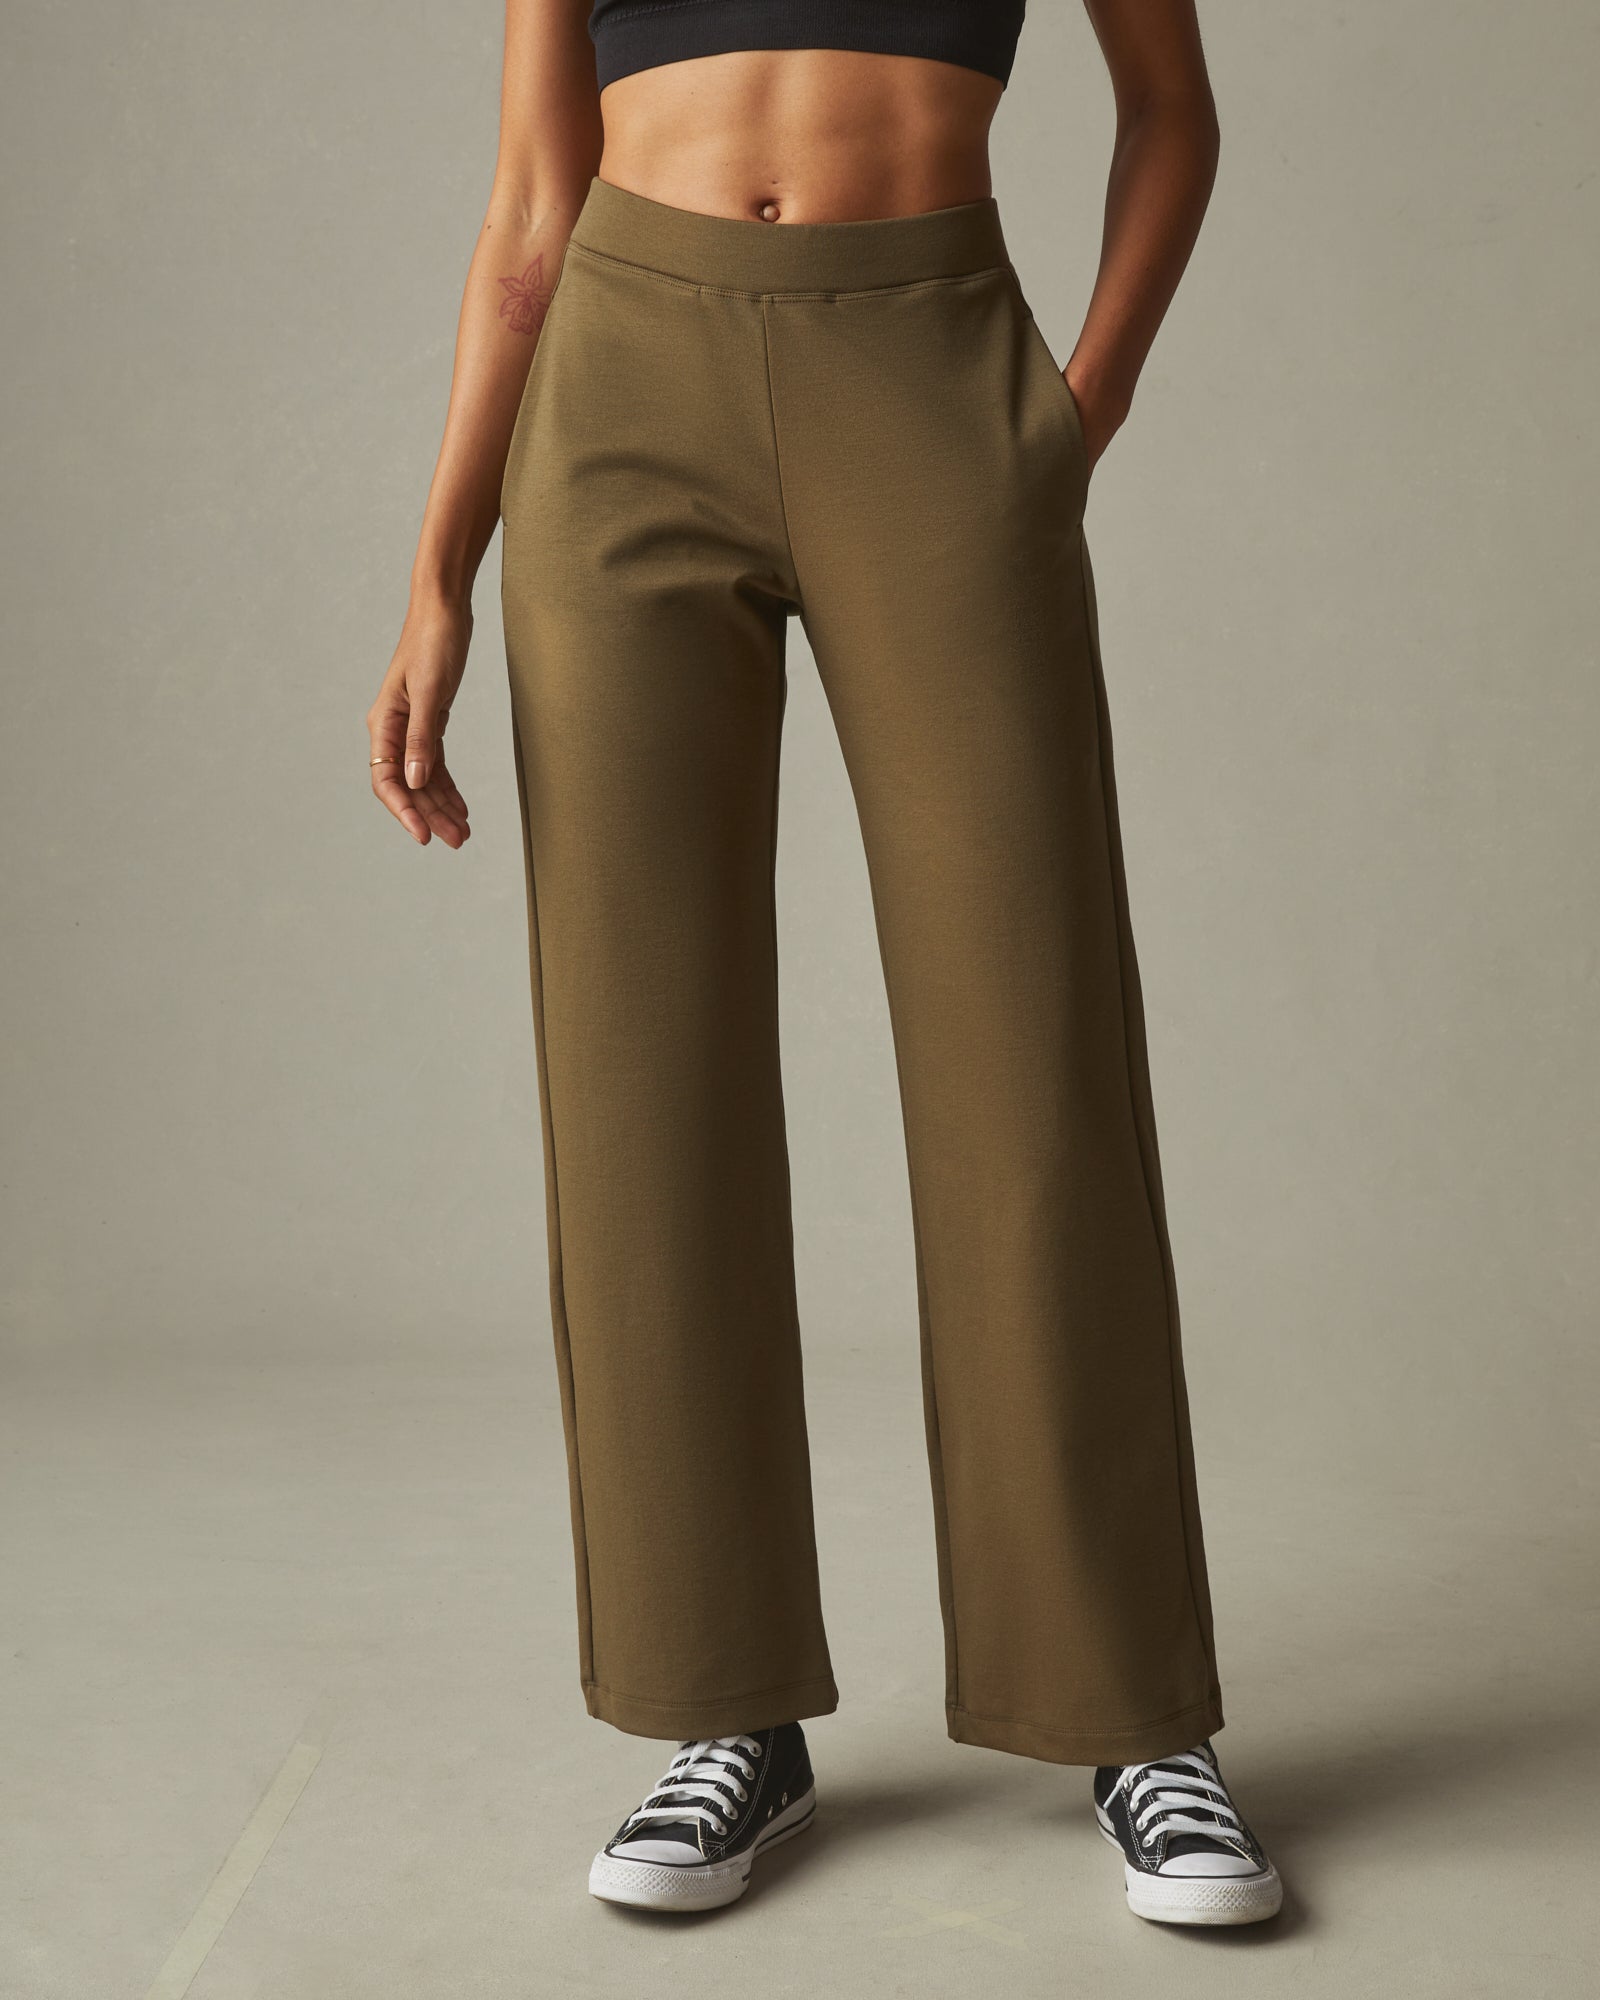 Chic Navy Blue Pants - High Waisted Pants - Blue Trousers - $37.00